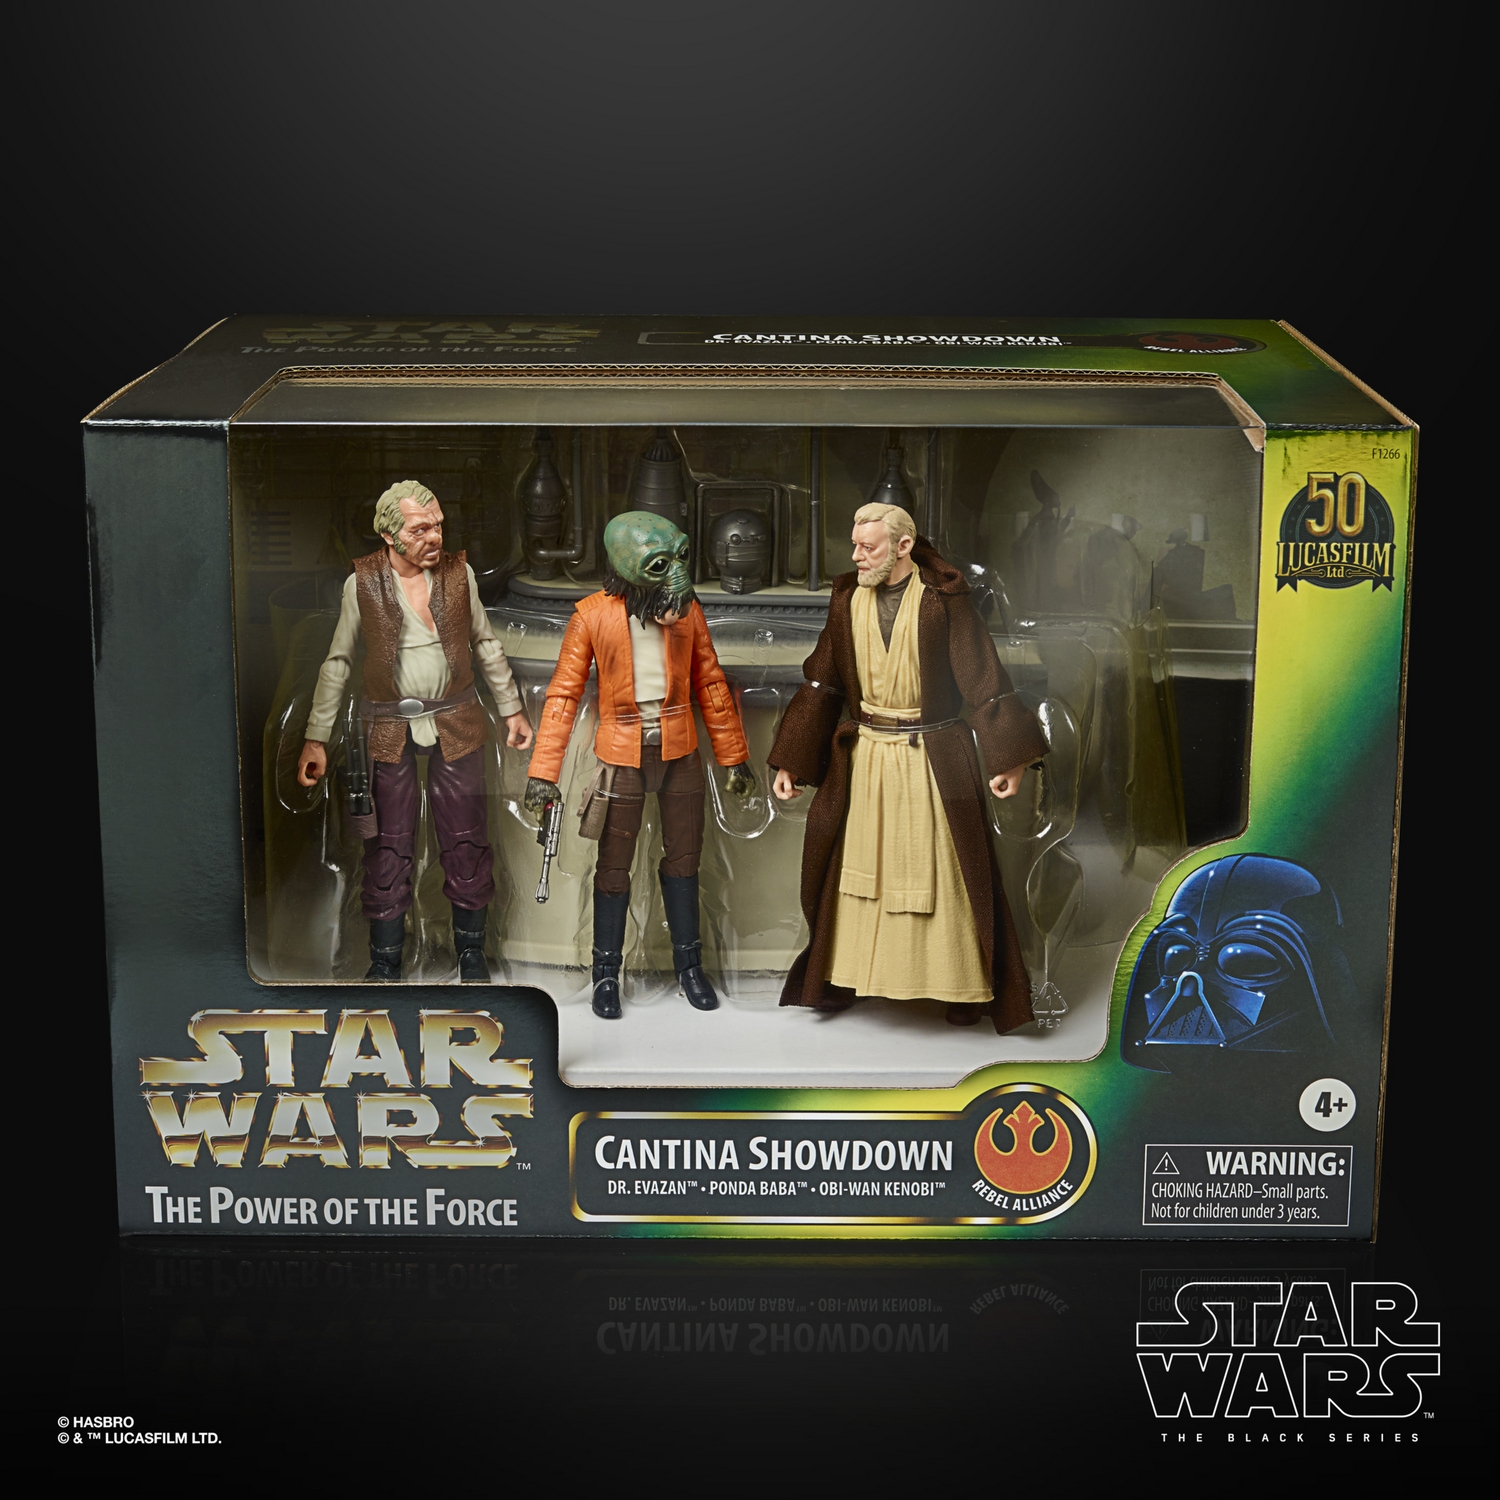 STAR WARS THE BLACK SERIES THE POWER OF THE FORCE CANTINA SHOWDOWN Playset - in pck (1).jpg